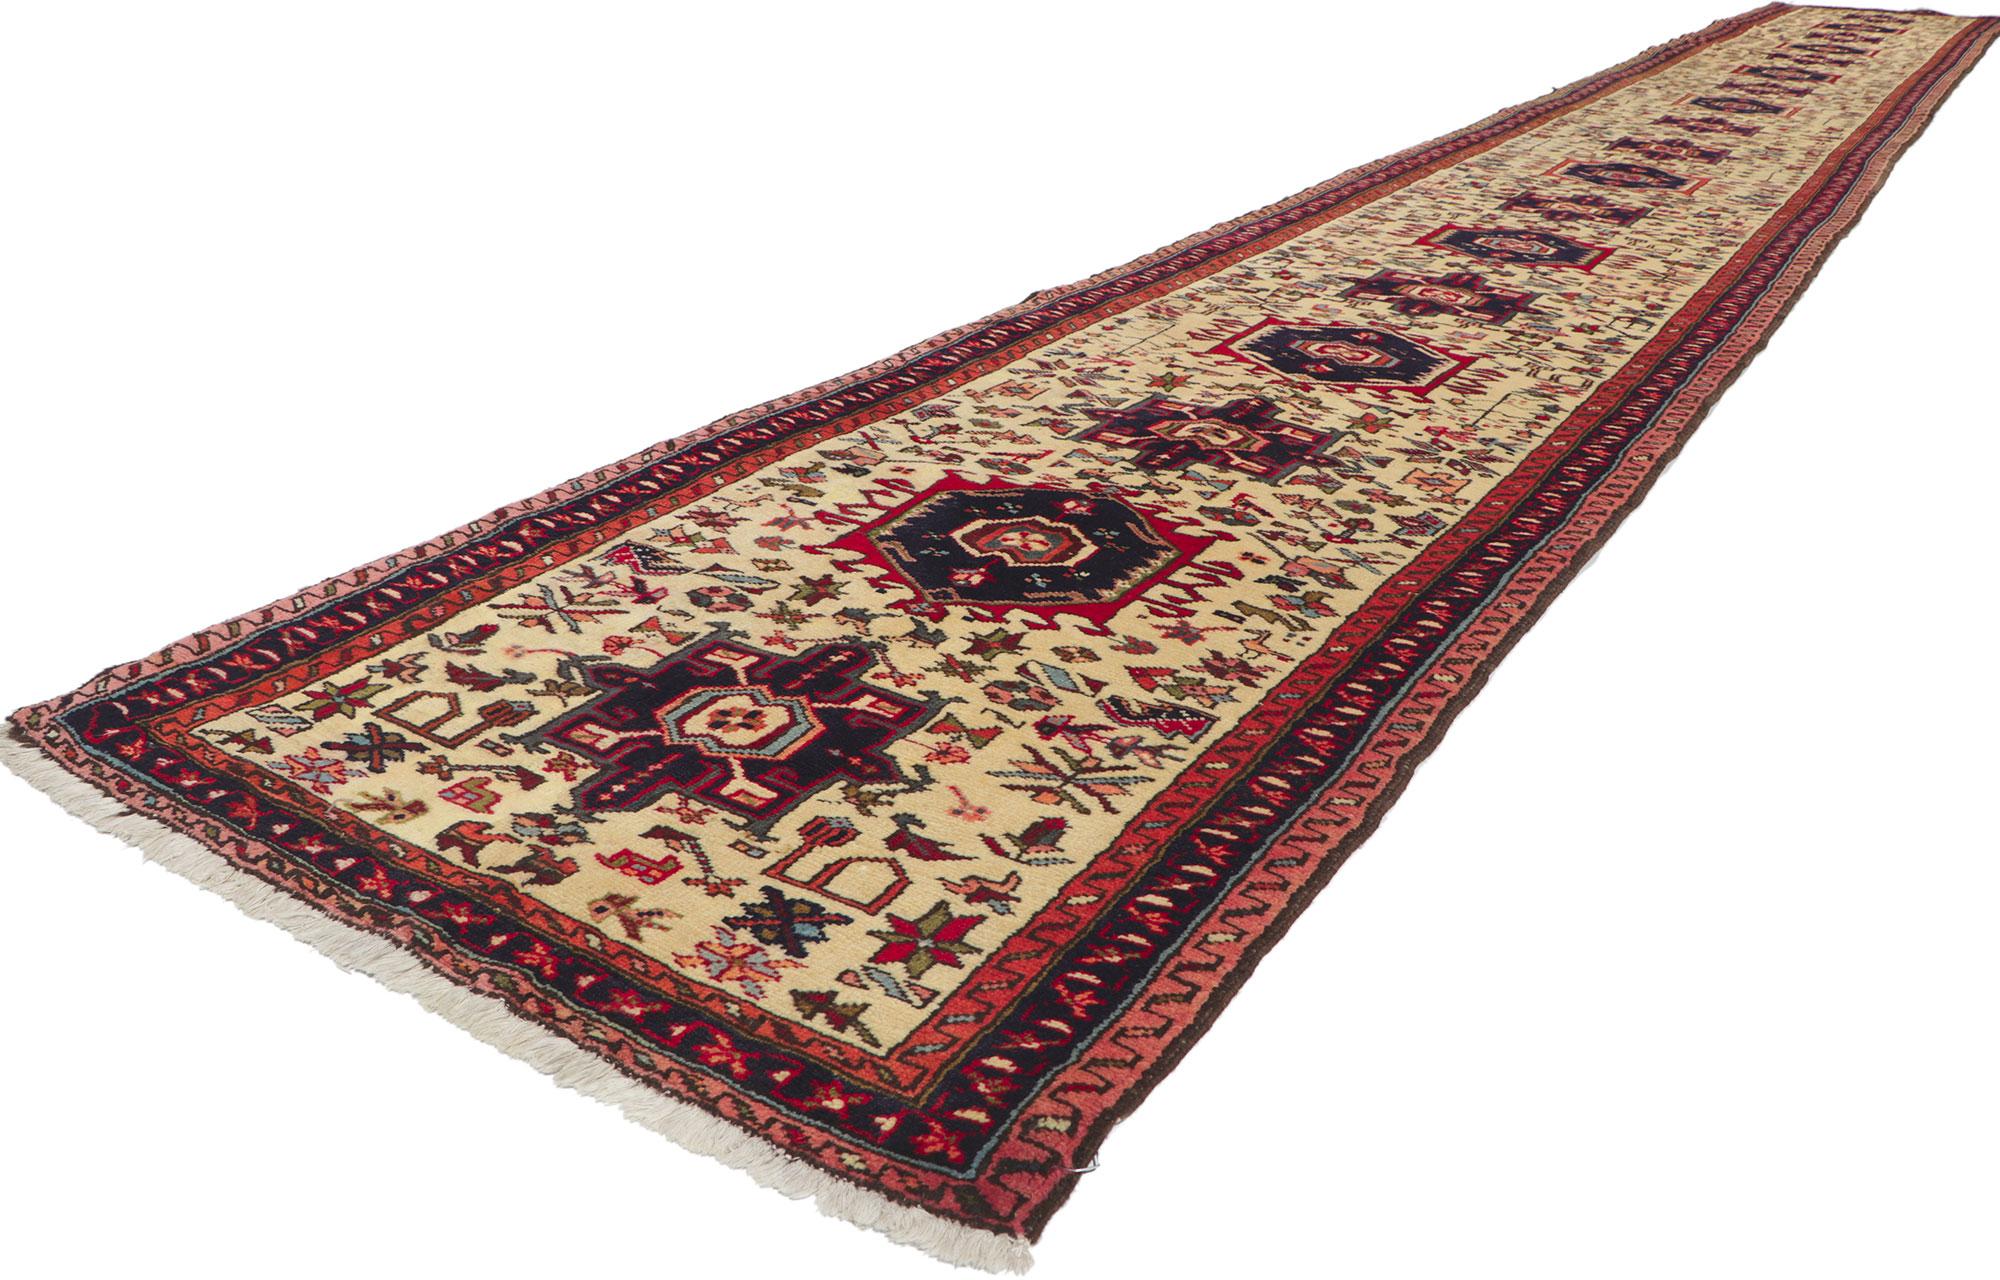 61220 Vintage Persian Heriz Runner 02'08 x 21'07. Full of tiny details and tribal style, this hand-knotted wool vintage Persian Heriz runner is a captivating vision of woven beauty. The abrashed beige field features an allover geometric pattern. It